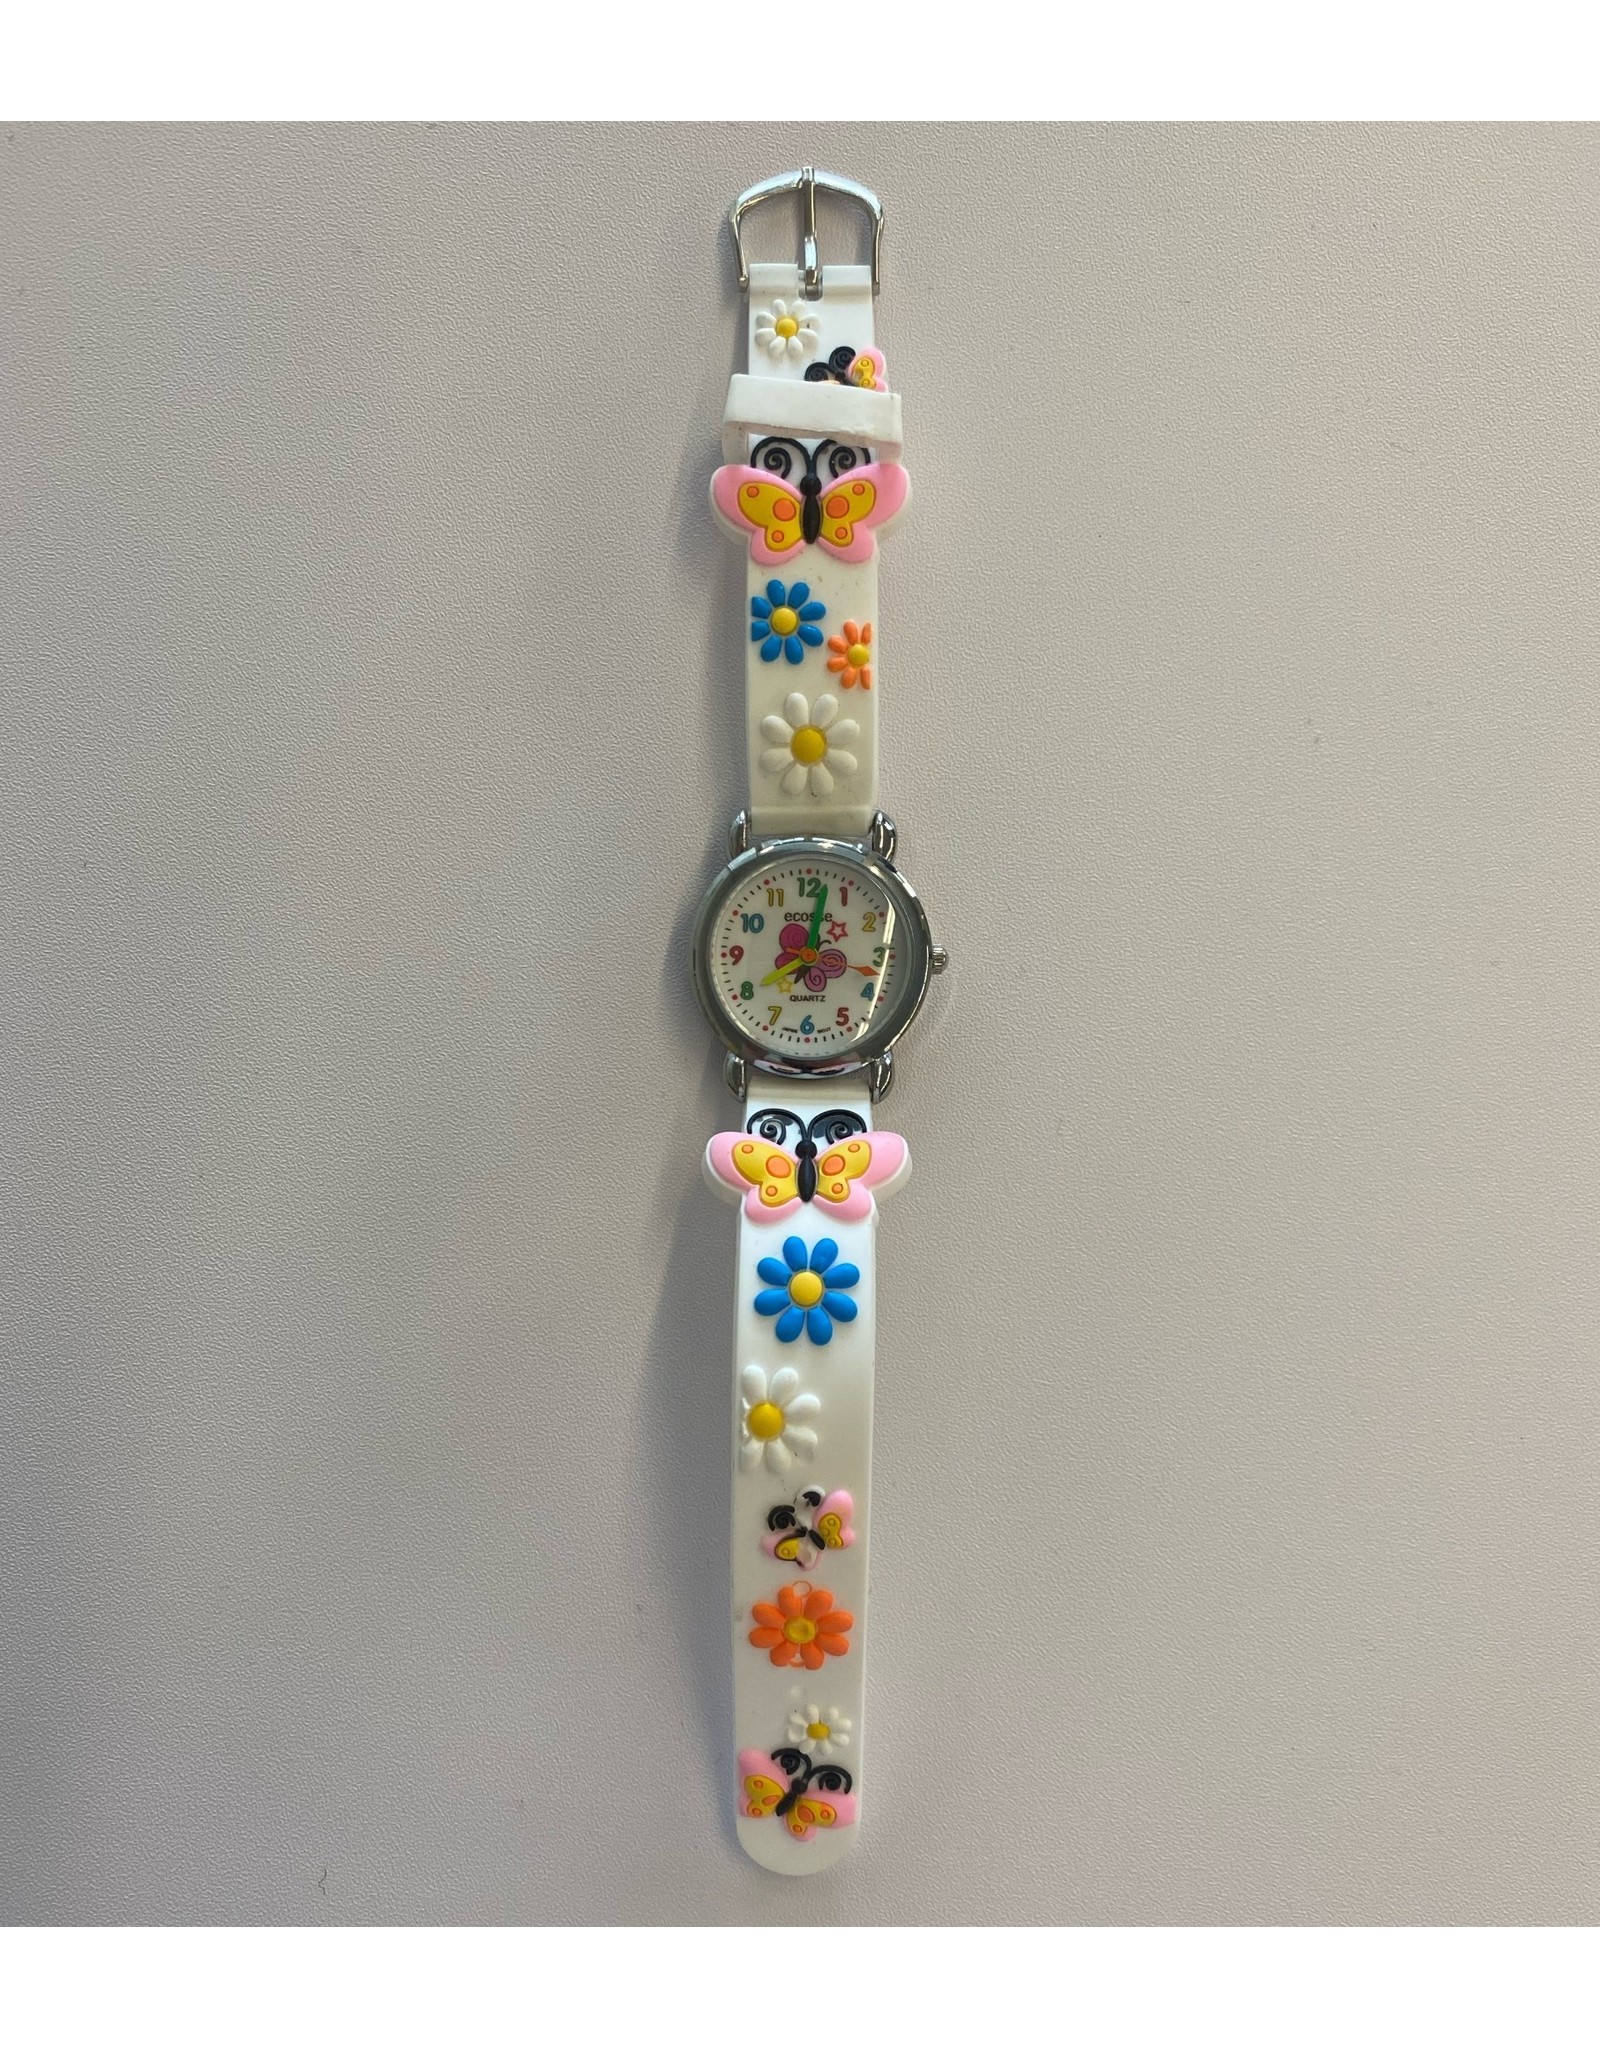 Children's Female Watch White with Flowers and Butterflies